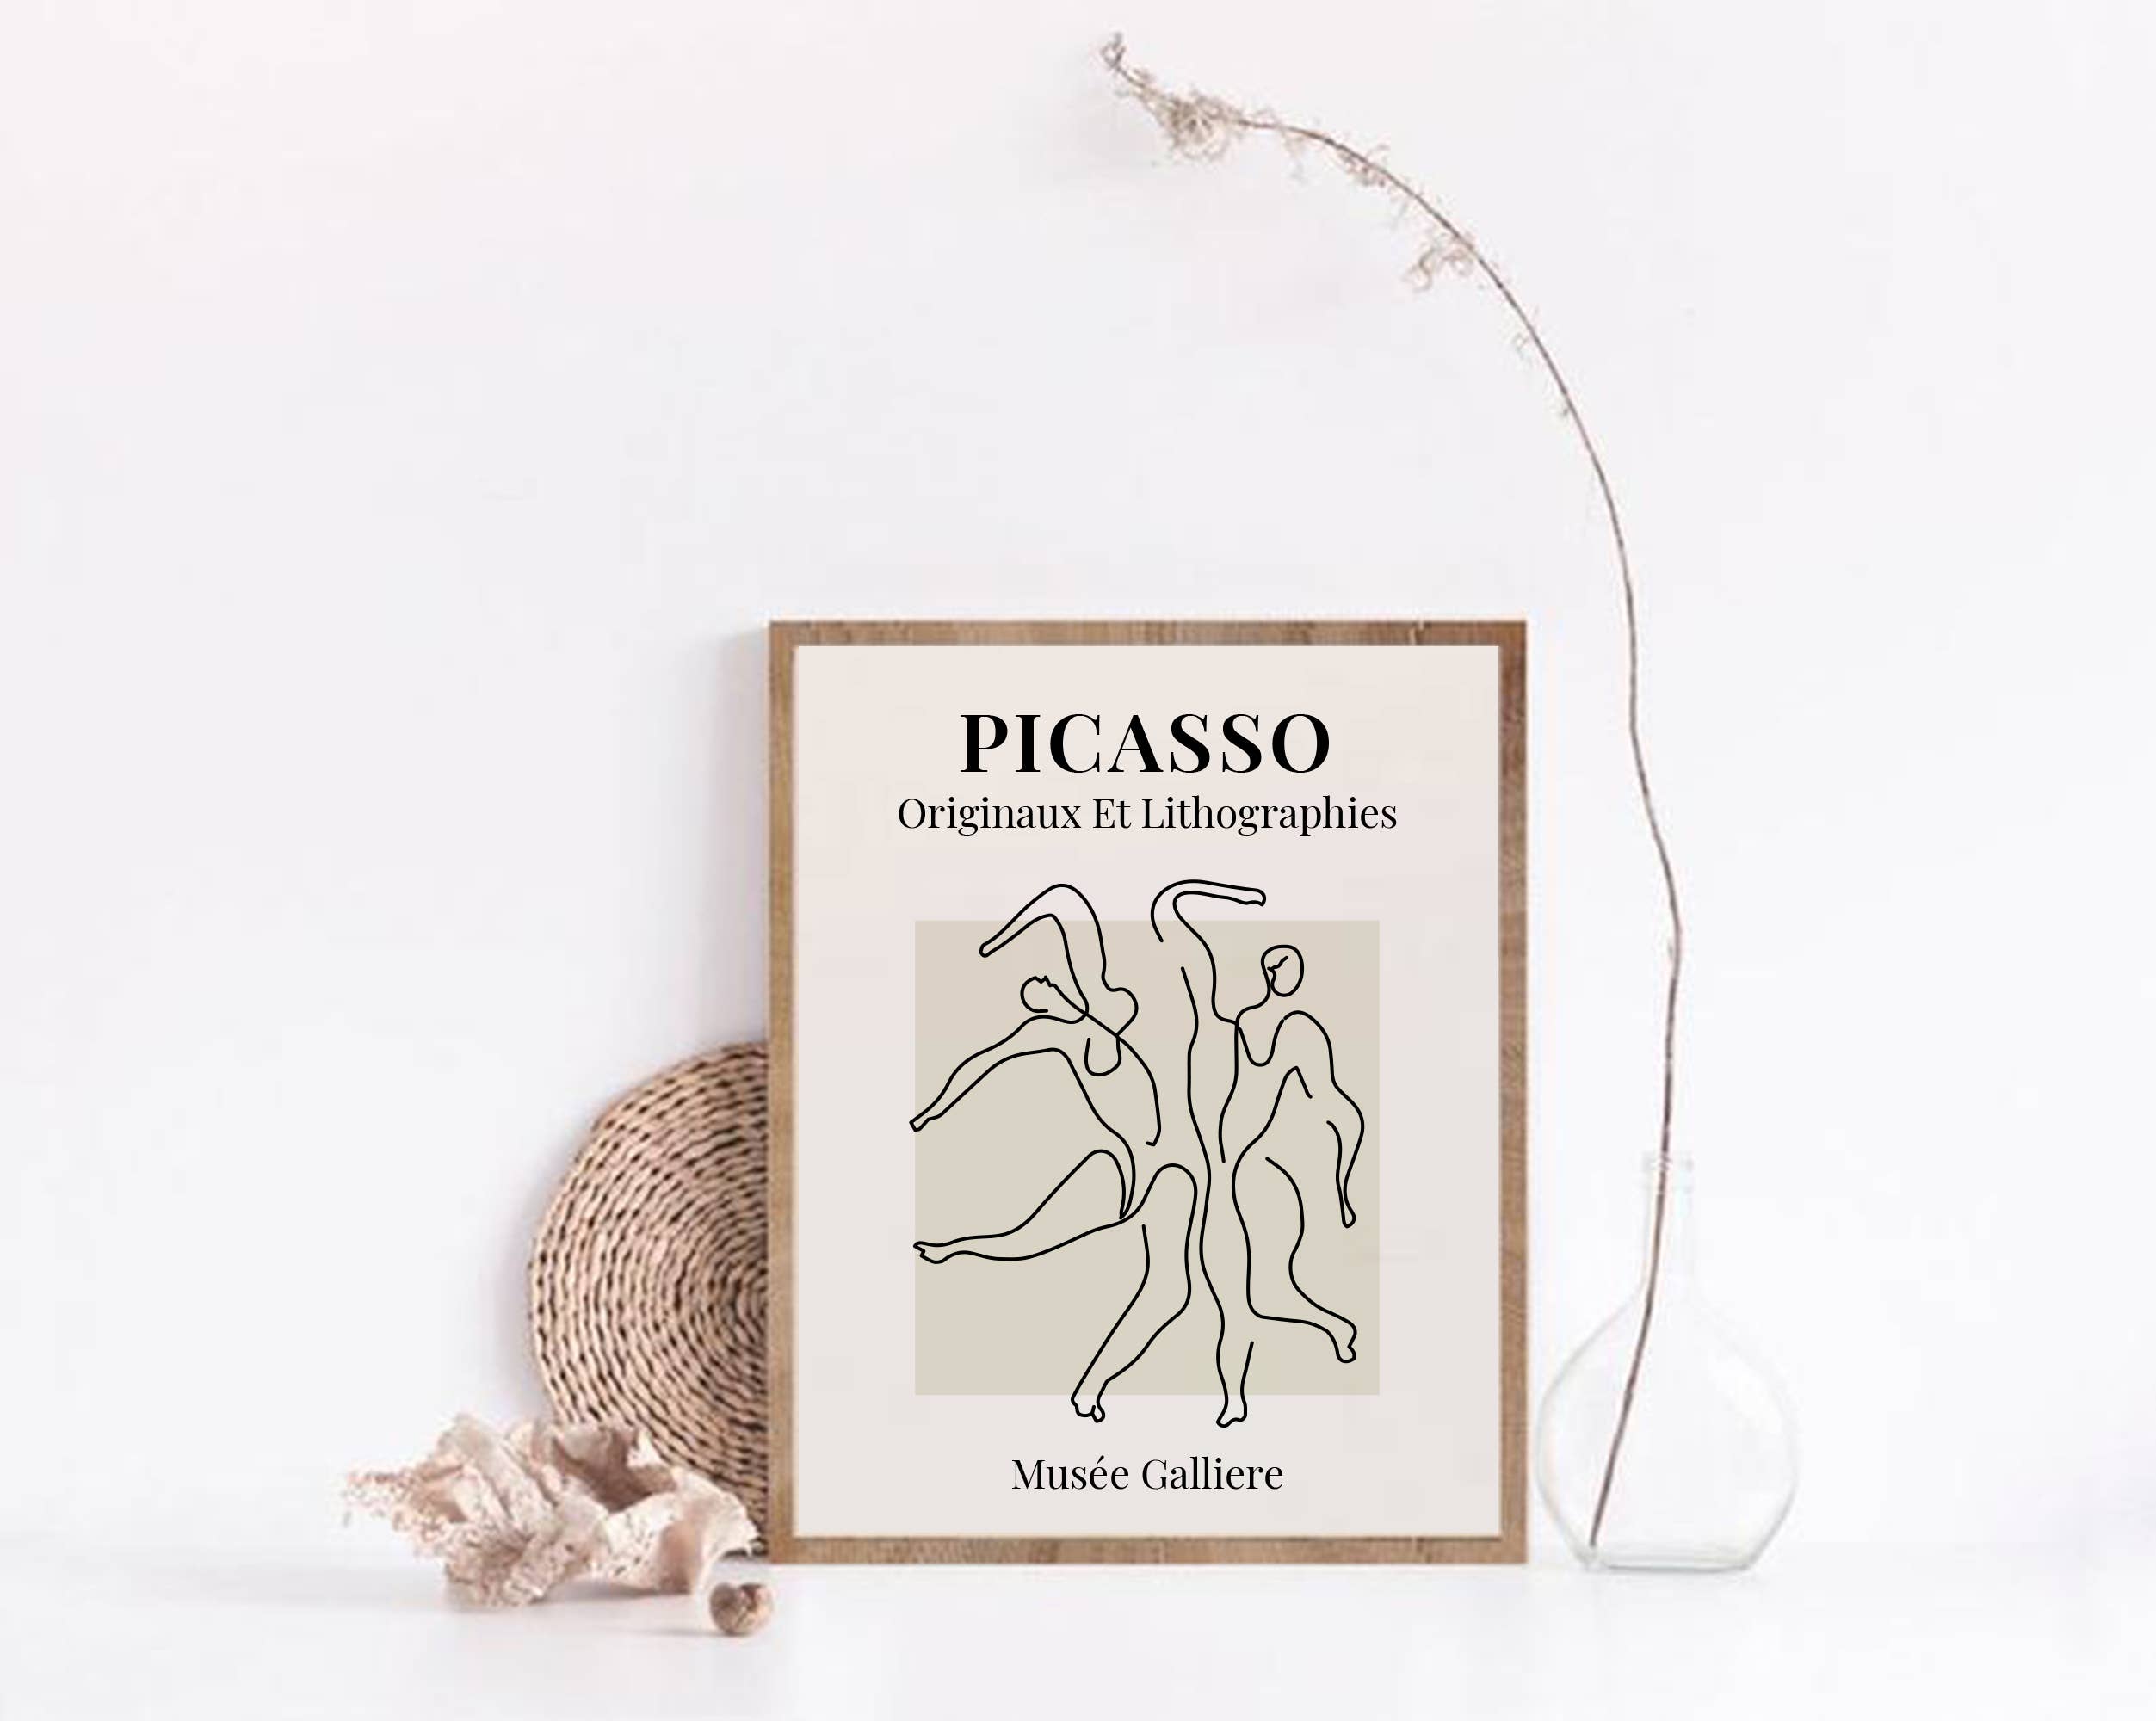 Picasso Exhibition Poster